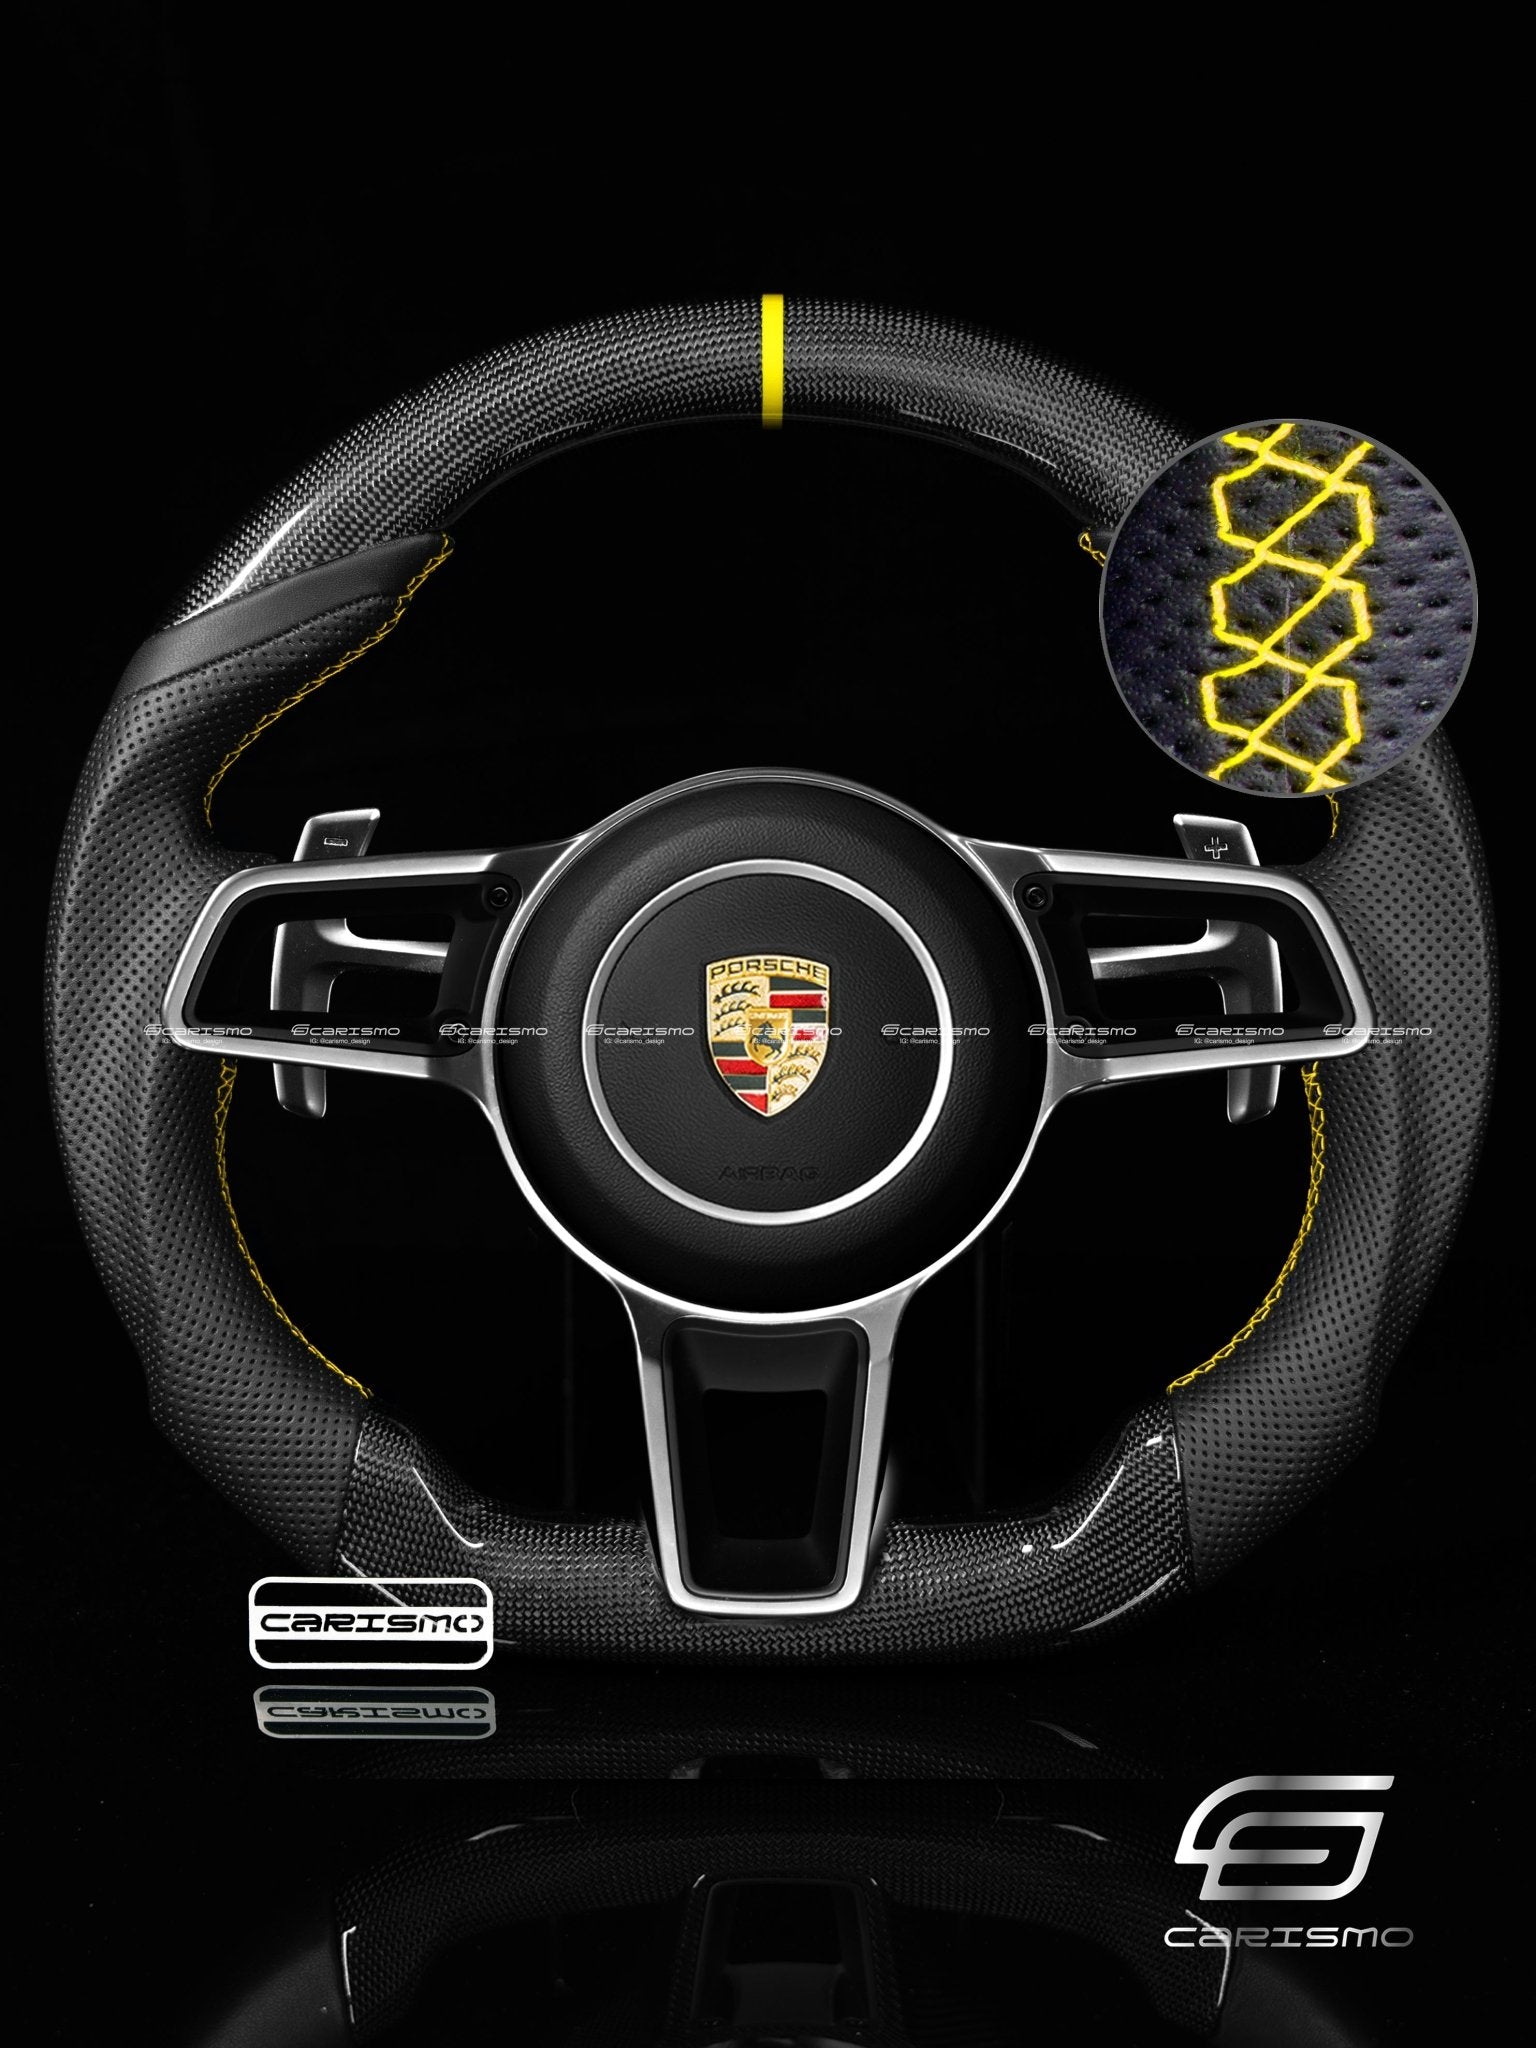 Carismo Steering Wheel For Porsche 911 (991.2 with Dials) - Sport - Gloss Plain Carbon - Perforated Leather - Carismo